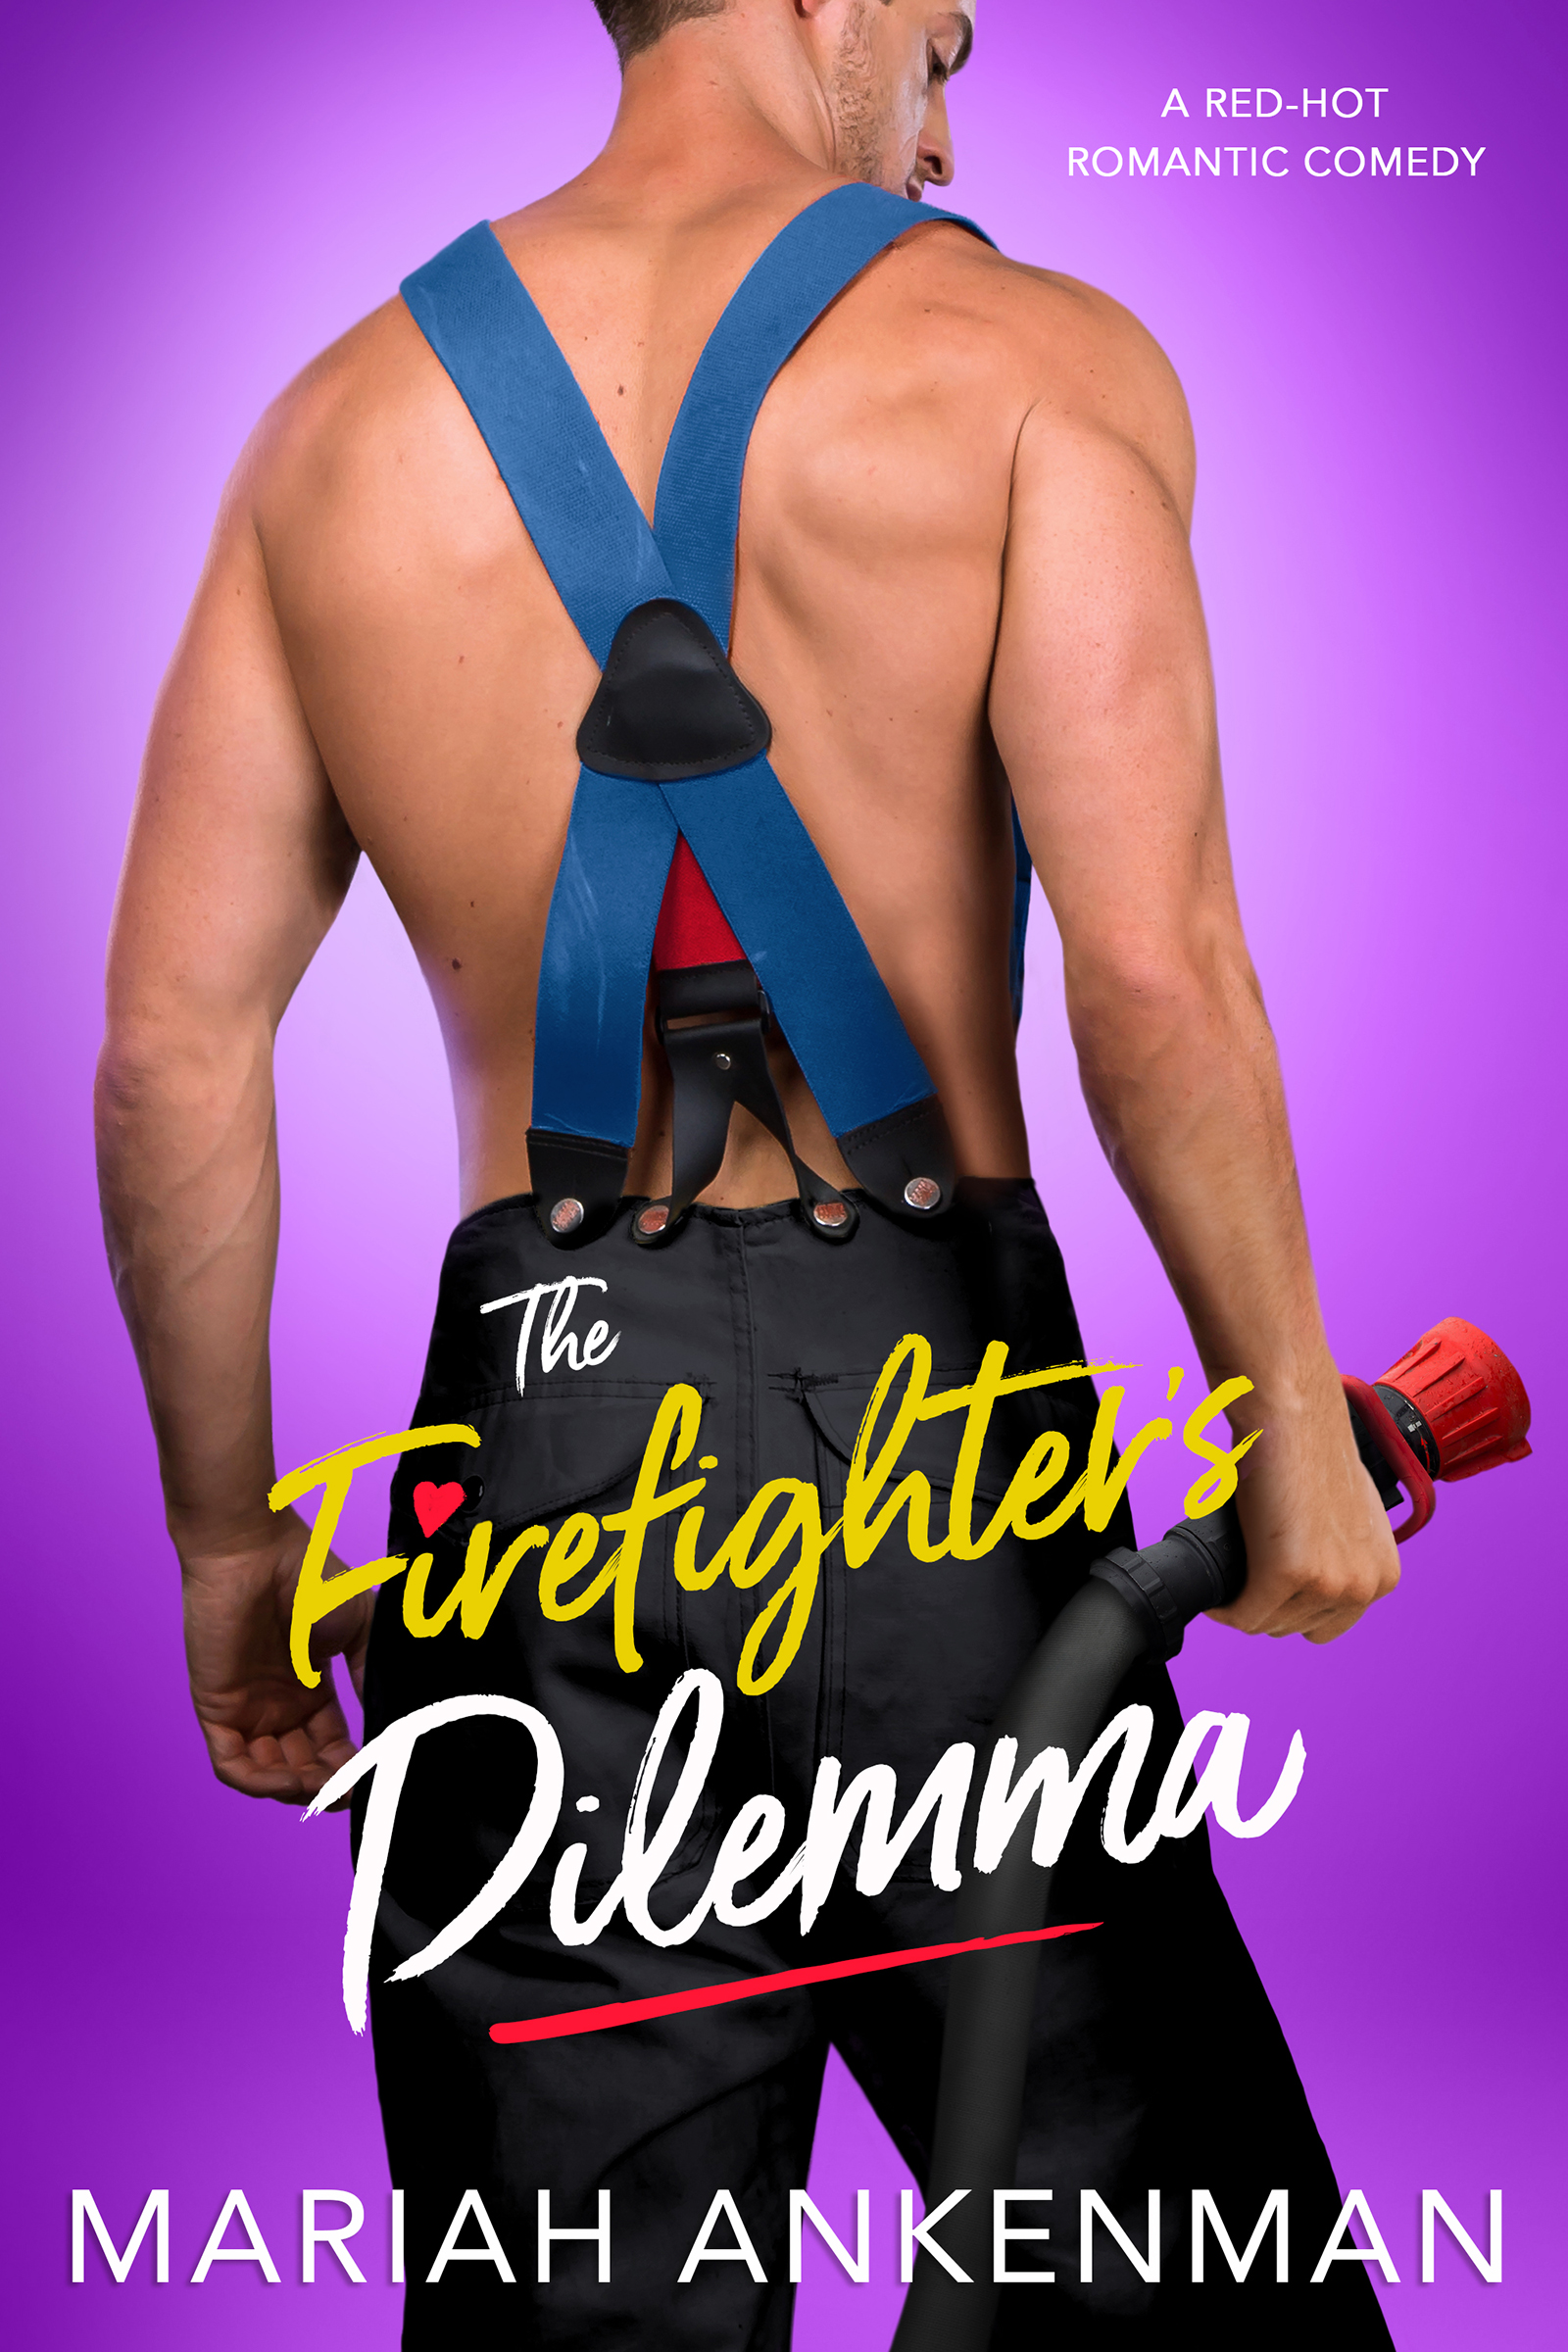 Man with his back facing us holding a fire hose with fire pants and no shirt purple background text reading The Firefighter's Dilemma Mariah Ankenman